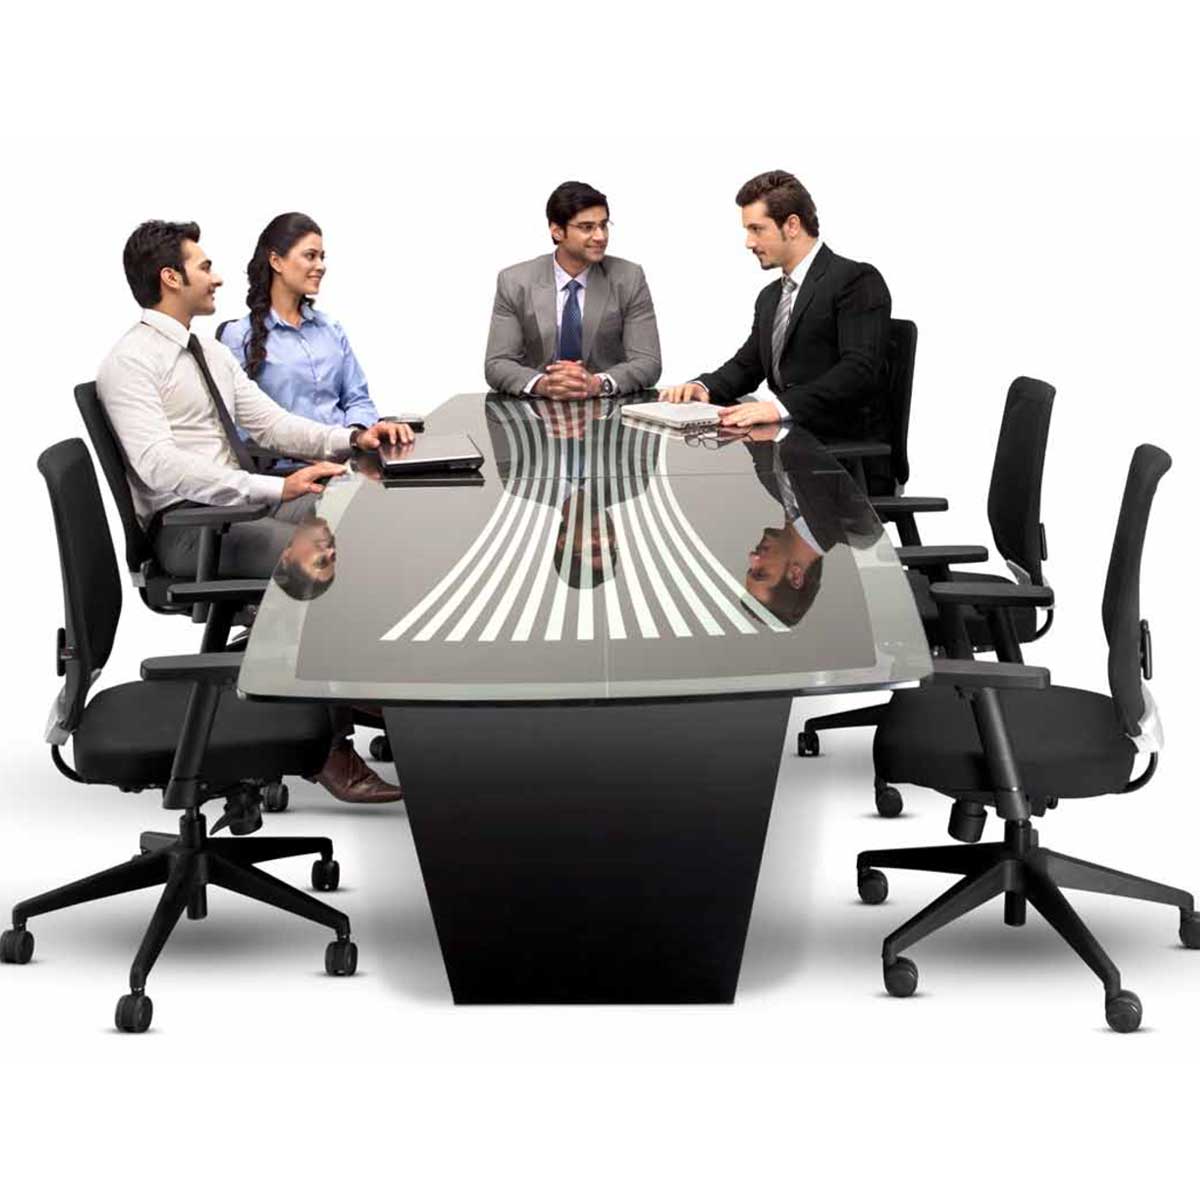 Conference table Manufacturers, Suppliers in Jhandewalan